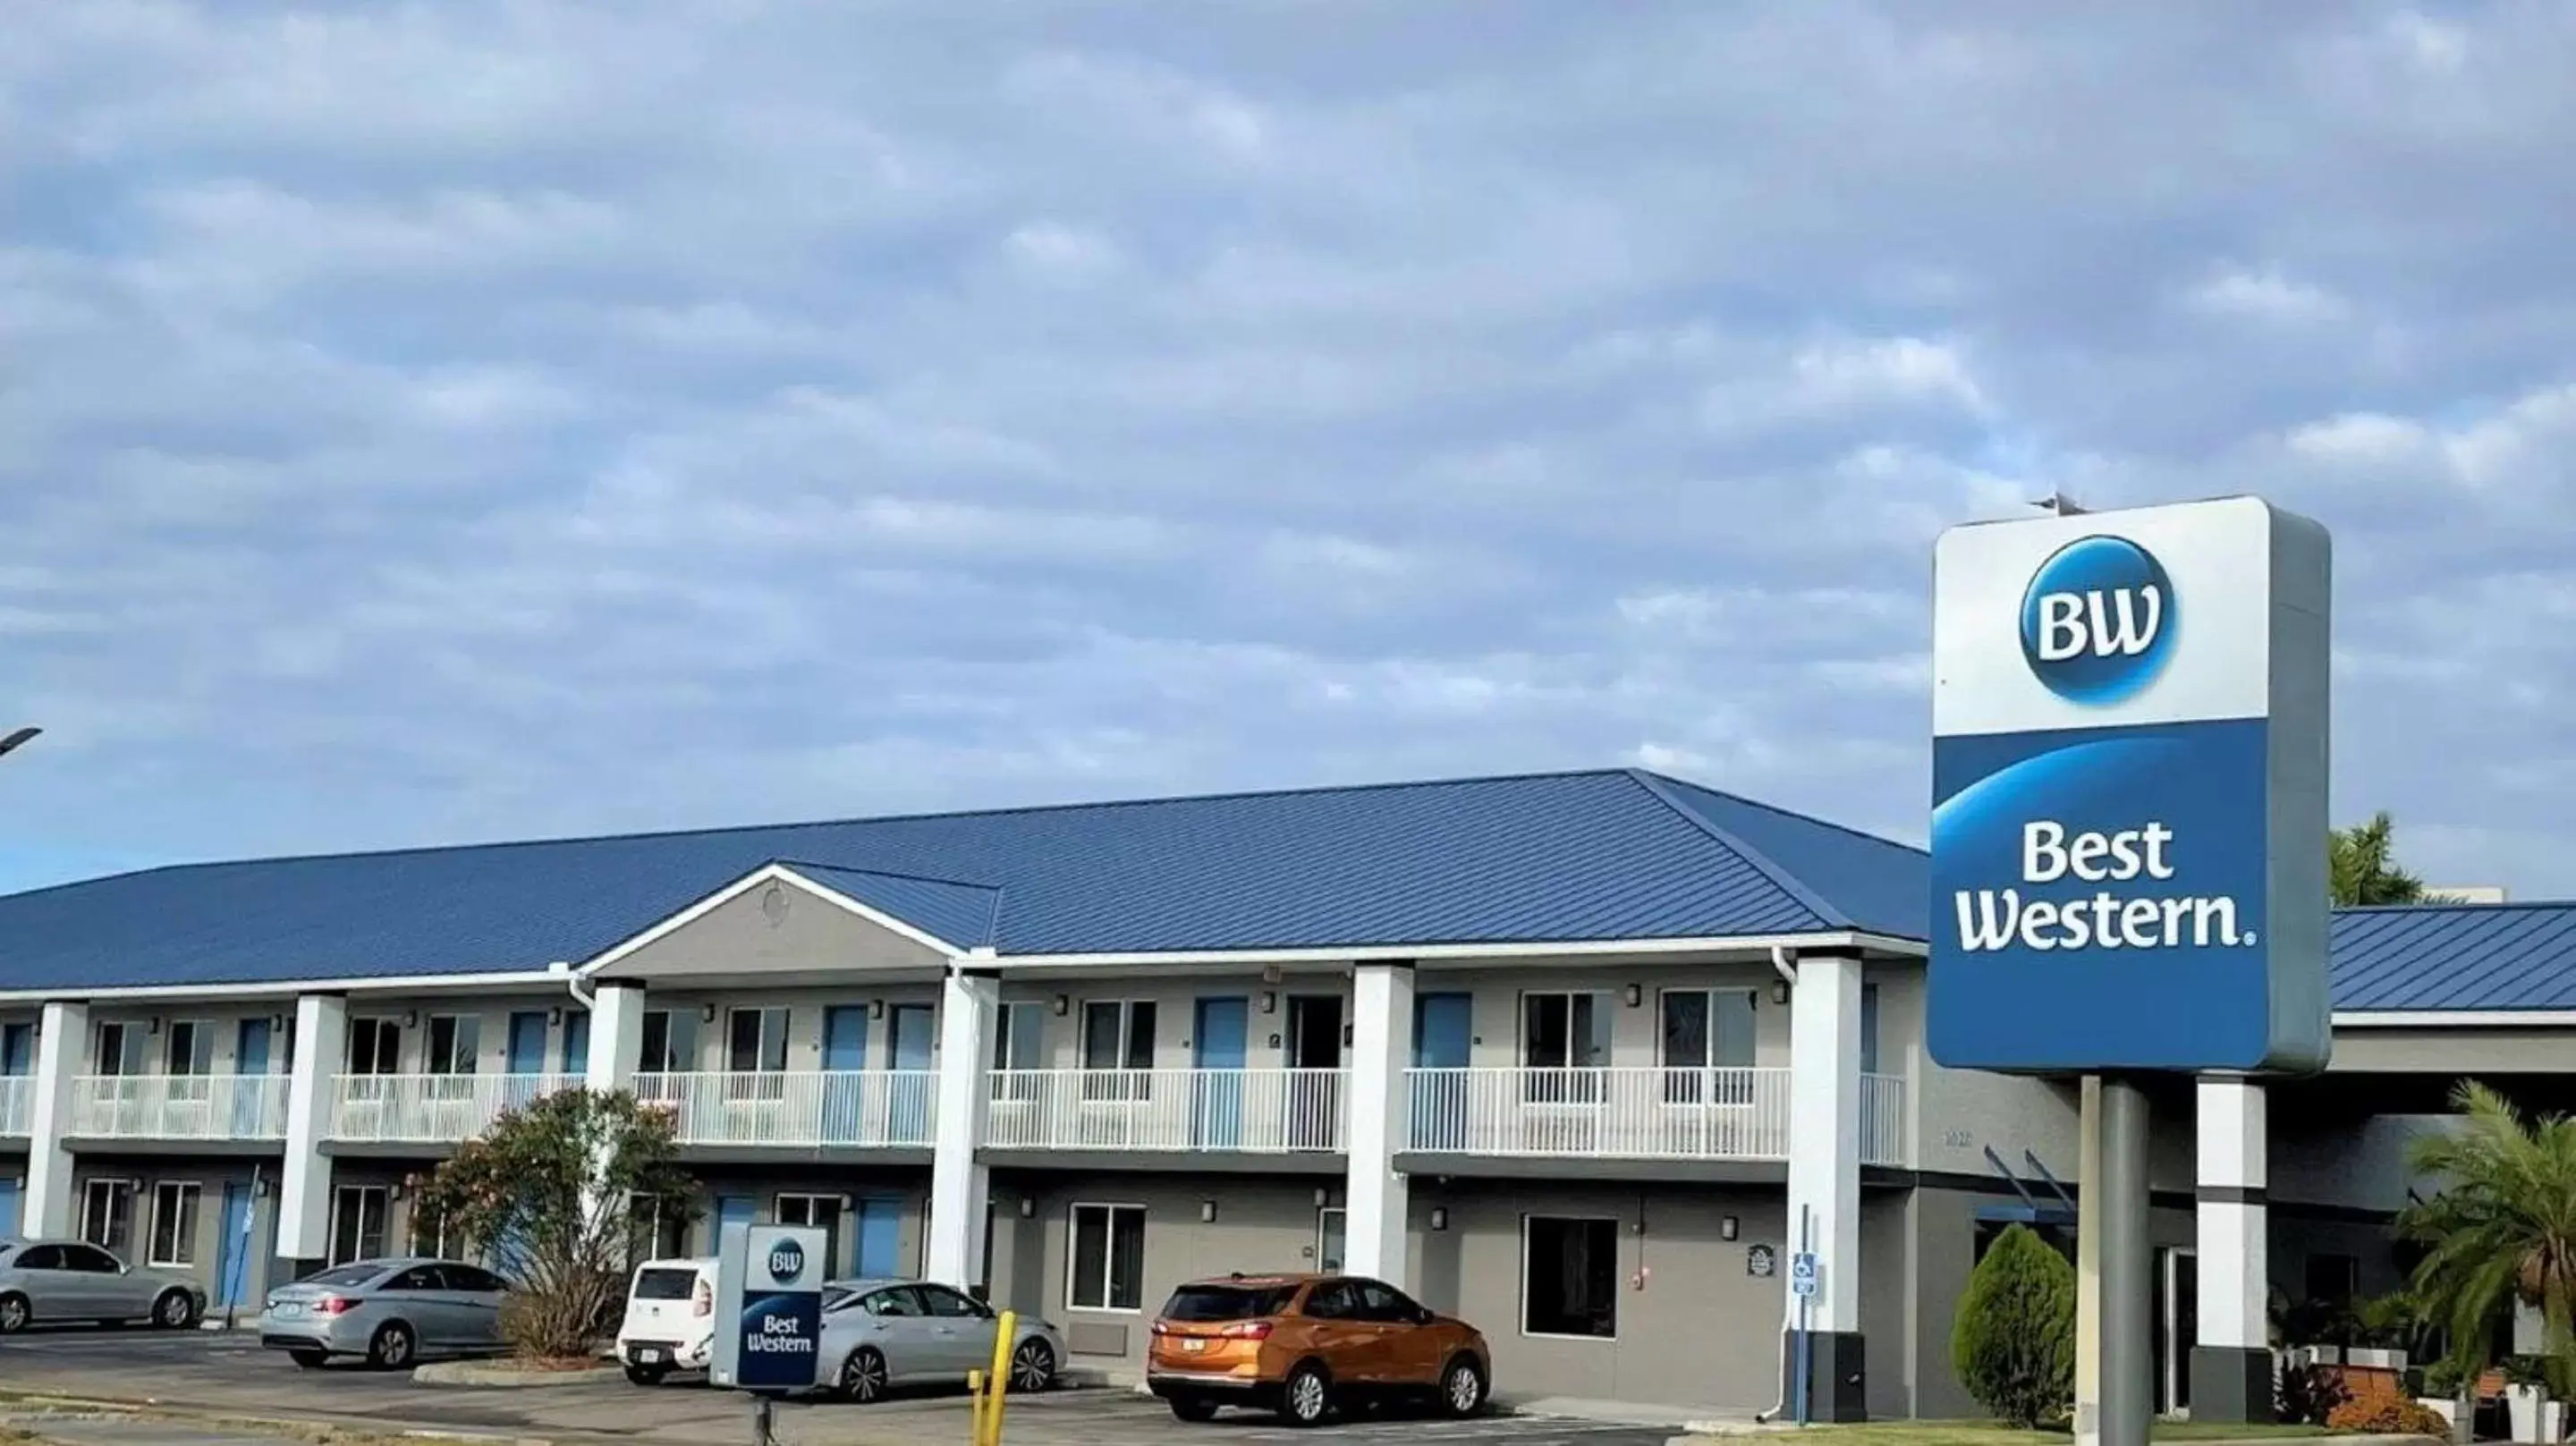 Property building in Best Western of Clewiston